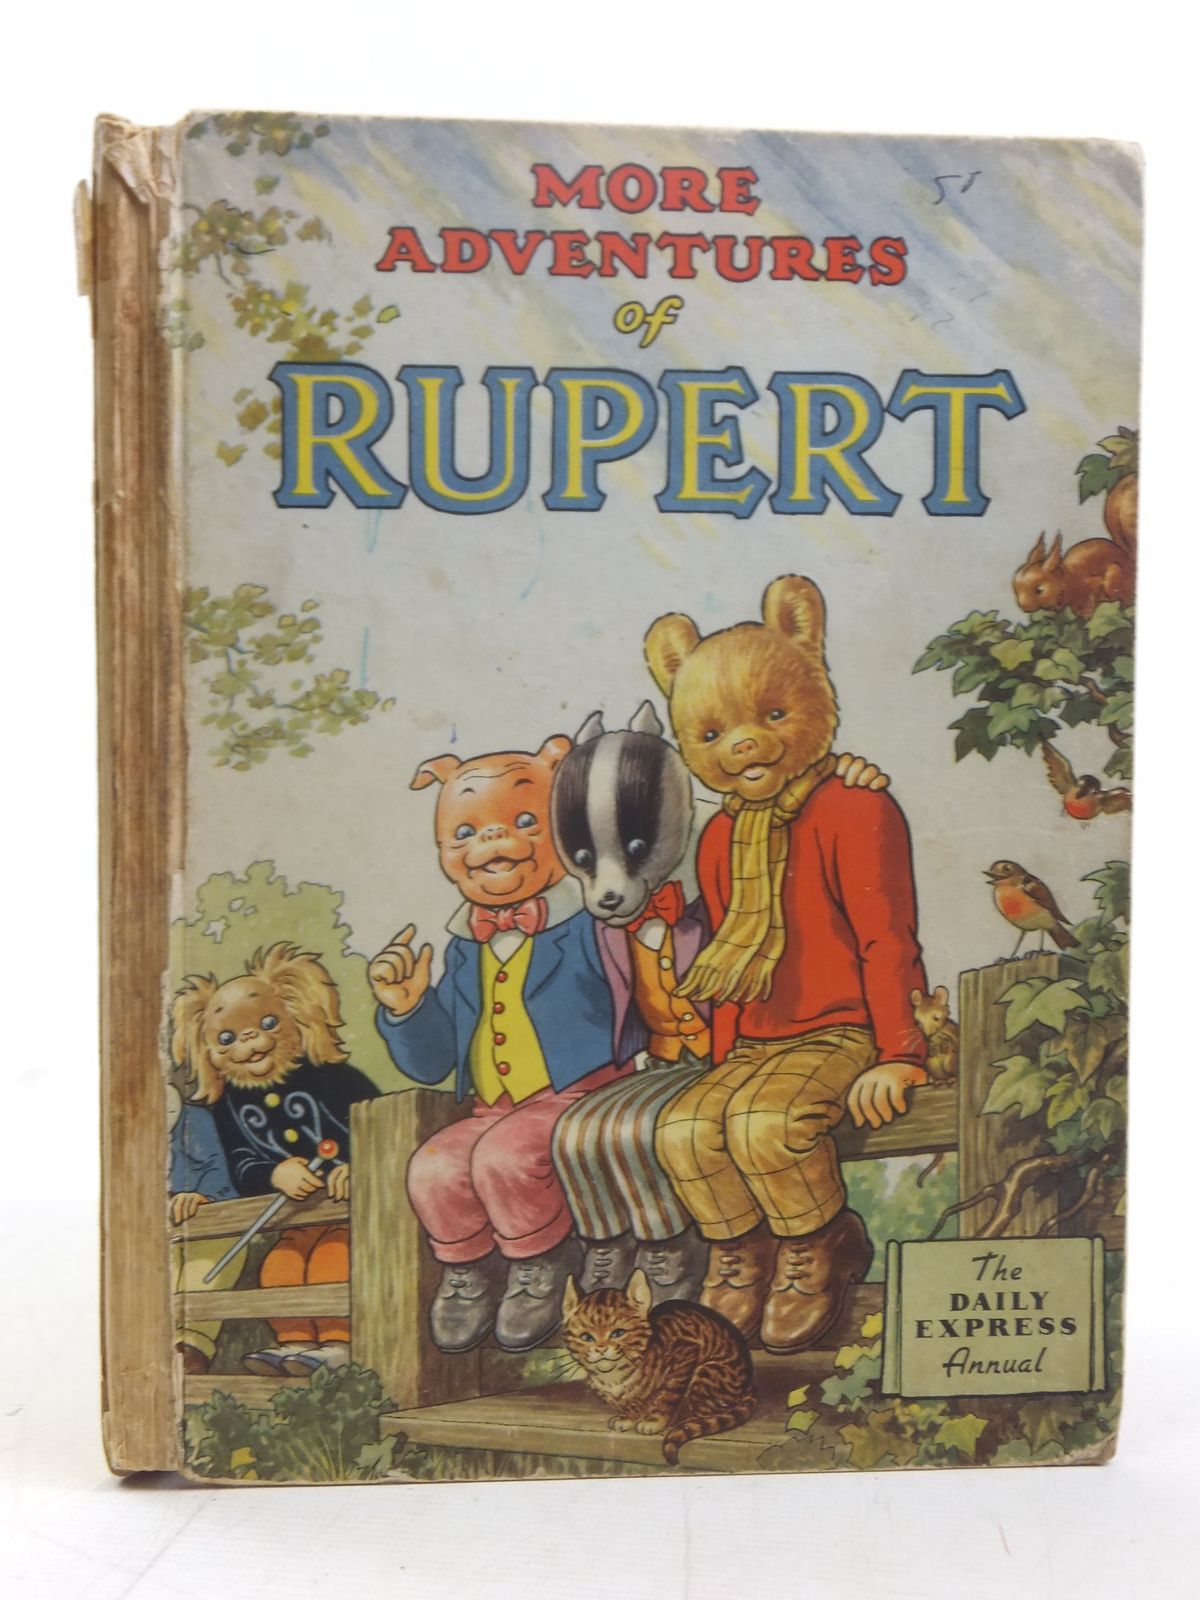 Photo of RUPERT ANNUAL 1953 - MORE ADVENTURES OF RUPERT written by Bestall, Alfred illustrated by Bestall, Alfred published by Daily Express (STOCK CODE: 2116830)  for sale by Stella & Rose's Books